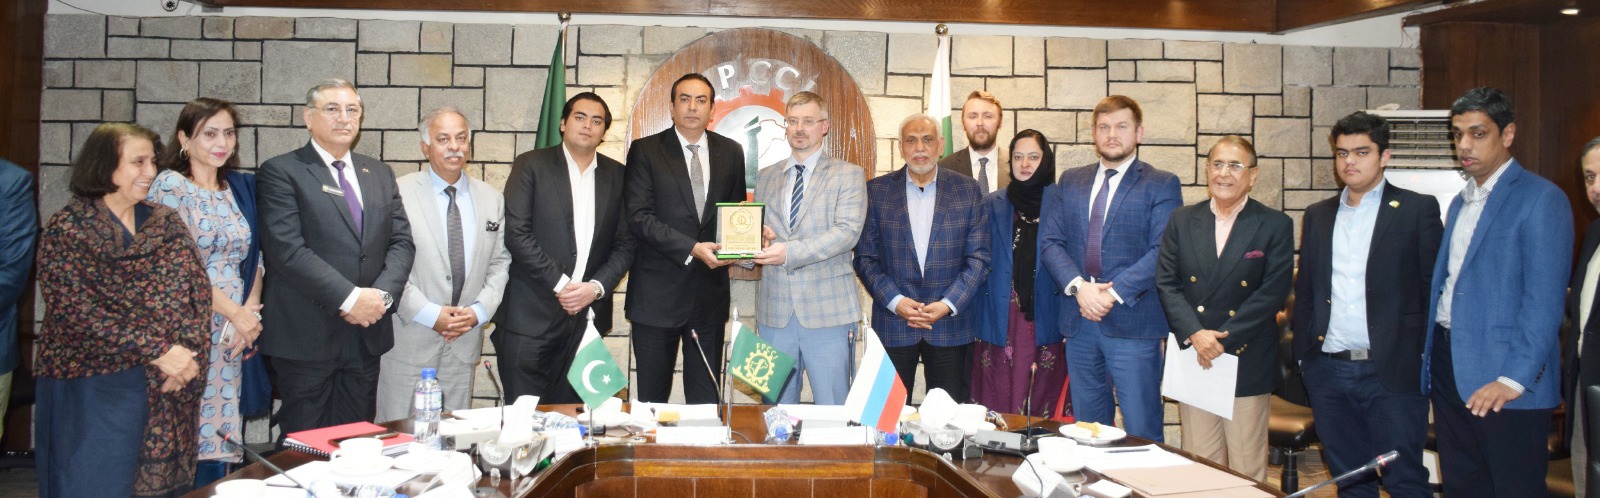 ATIF IKRAM SHEIK PRESIDENT OF FPCCI INVITED RUSSIA TO TAKE ADVANTAGE OF CPEC BY DEVELOPING A ROAD NETWORK IN THE WAKHAN CORRIDOR.